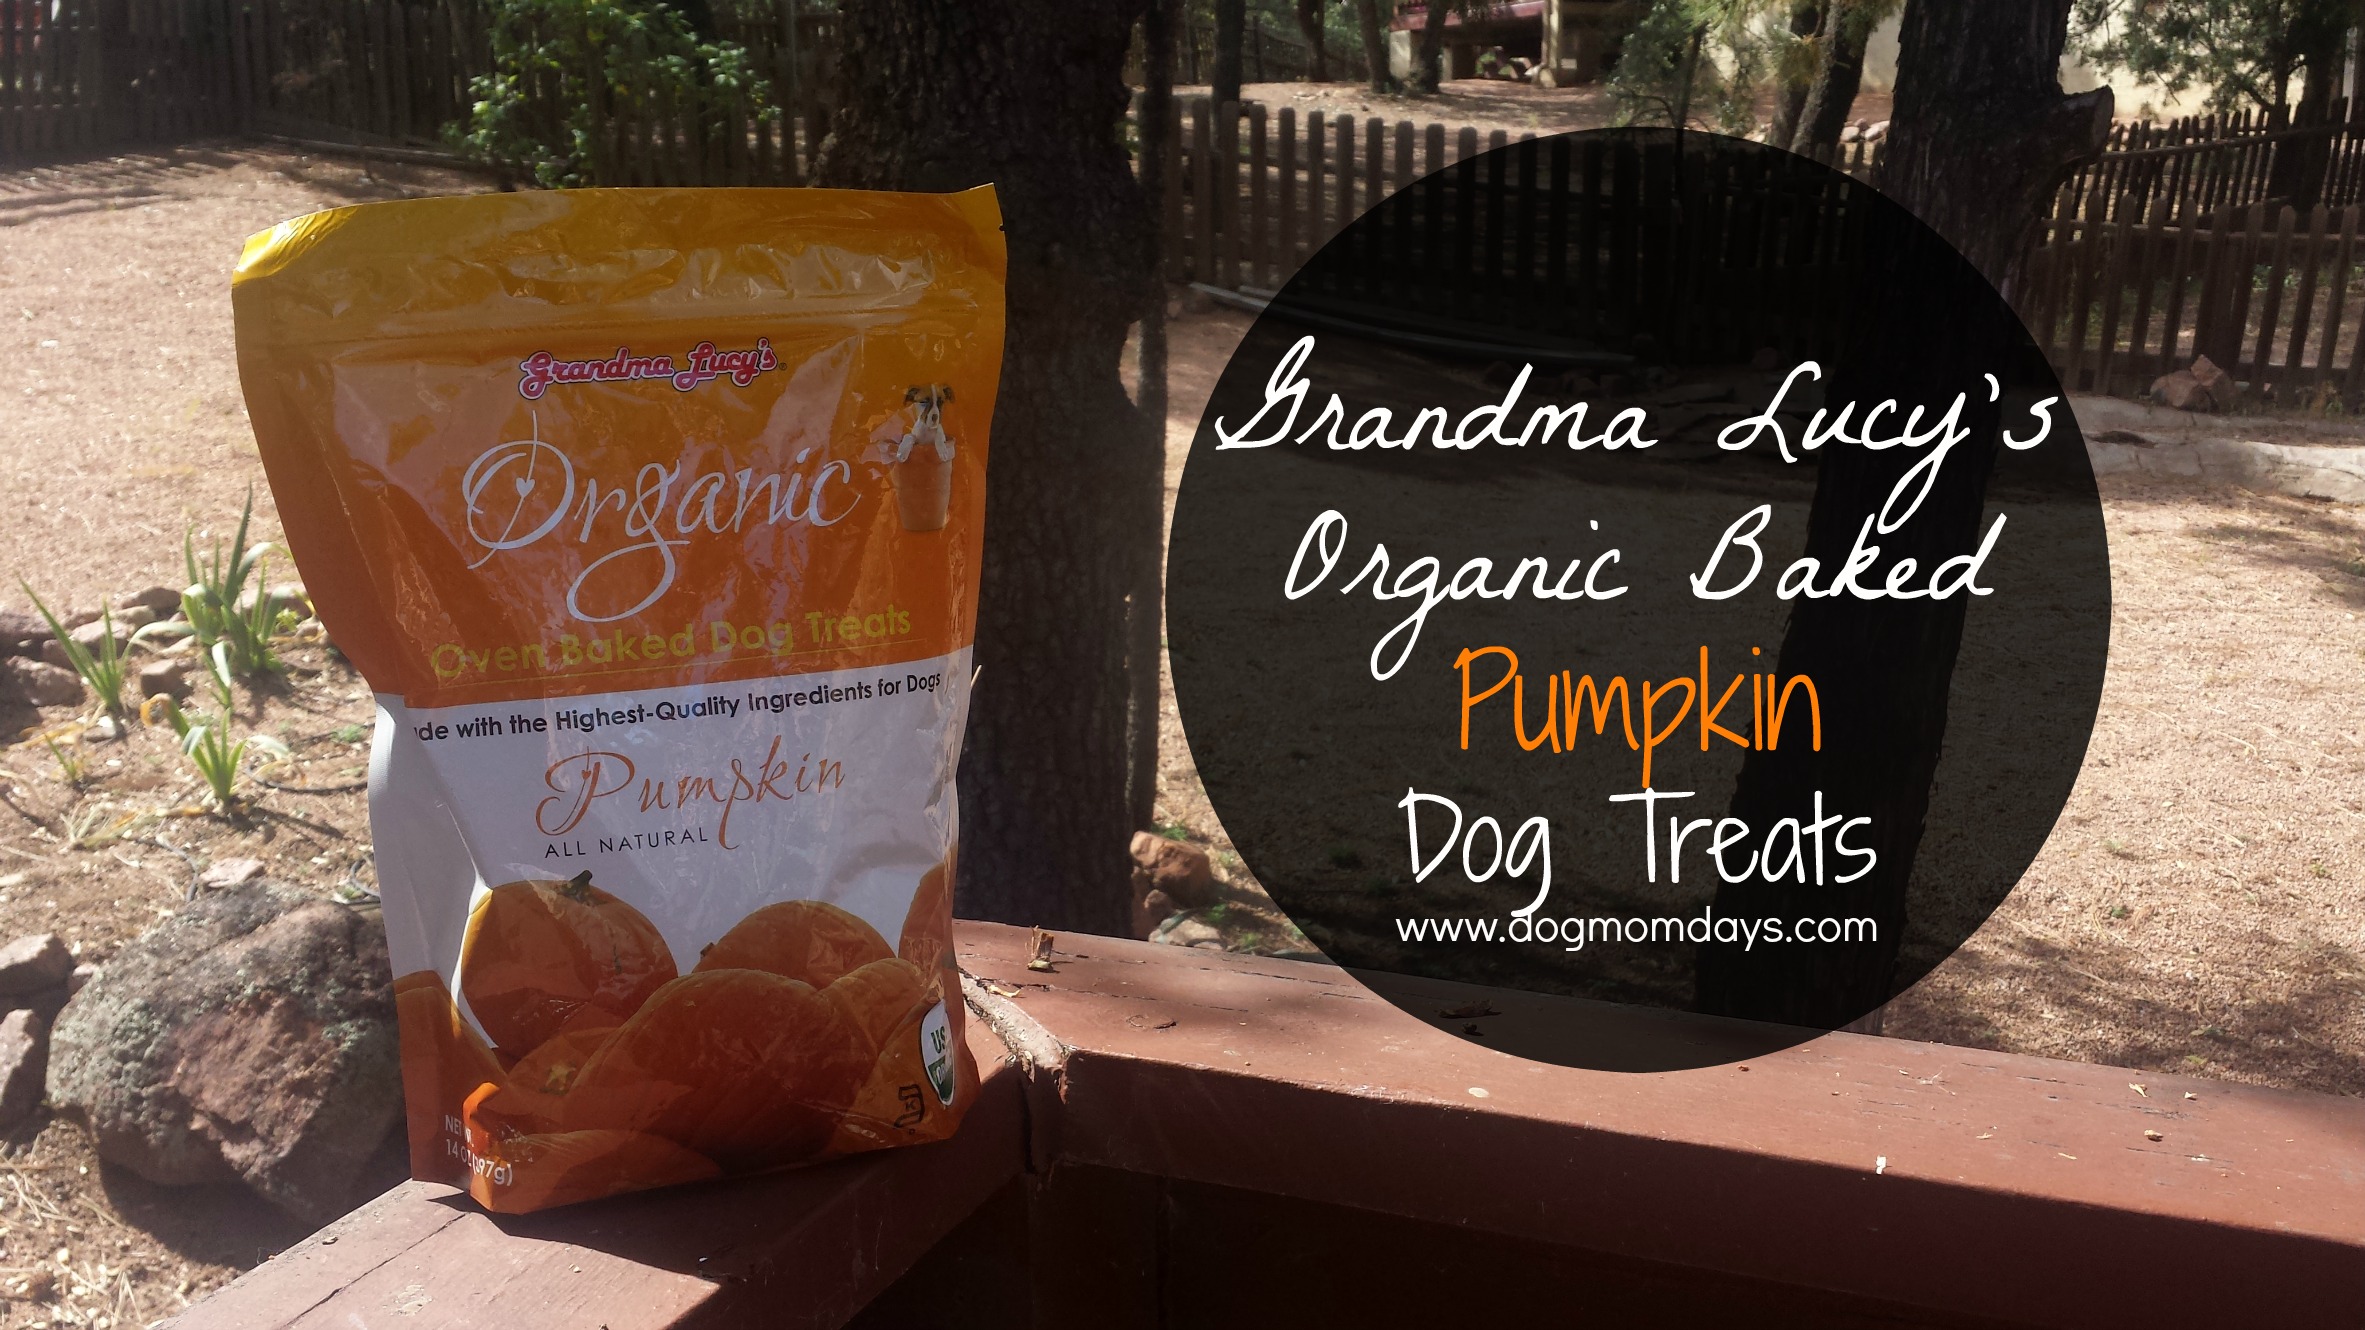 Grandma Lucy's Organic Baked Pumpkin Dog Treats product review